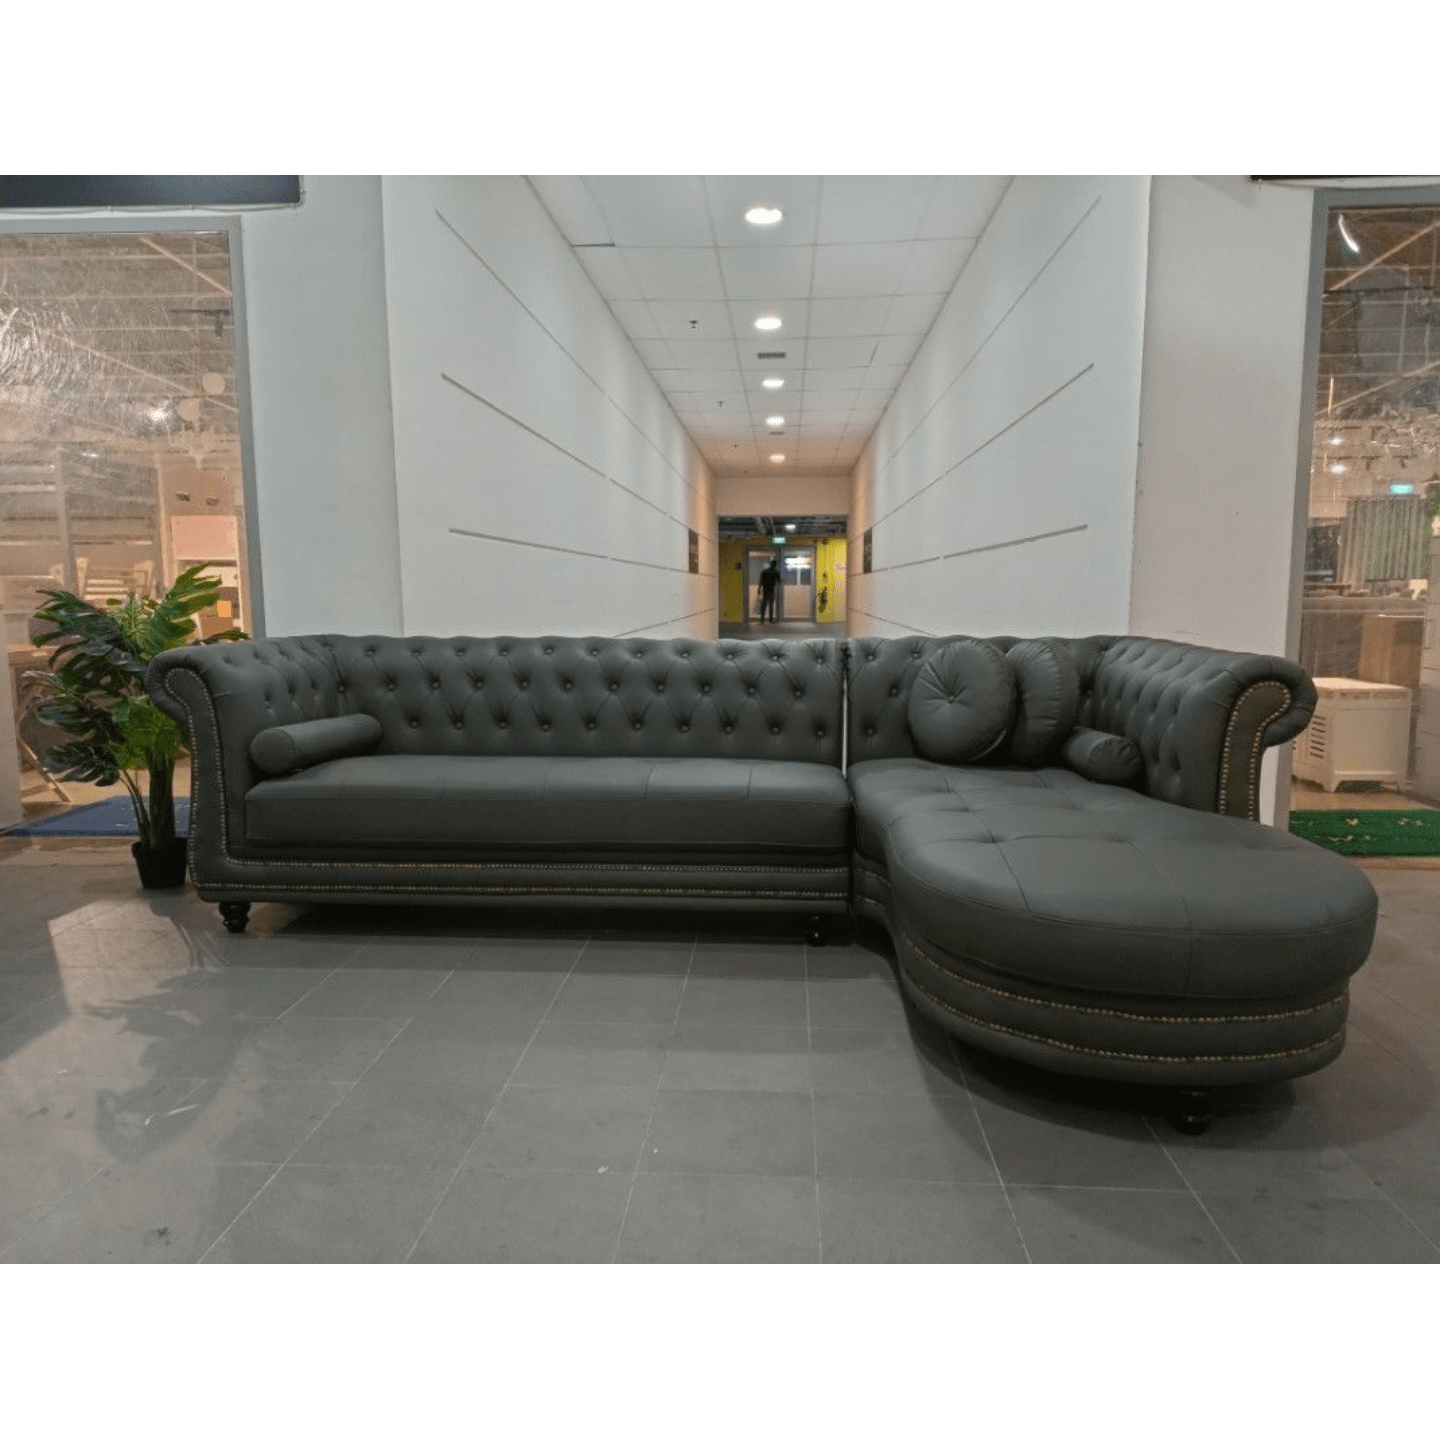 CAT FRIENDLY - ELYSIUM 4 Seater L-Shaped Chesterfield Sofa in MATT OLIVE GREEN TECH LEATHAIRE